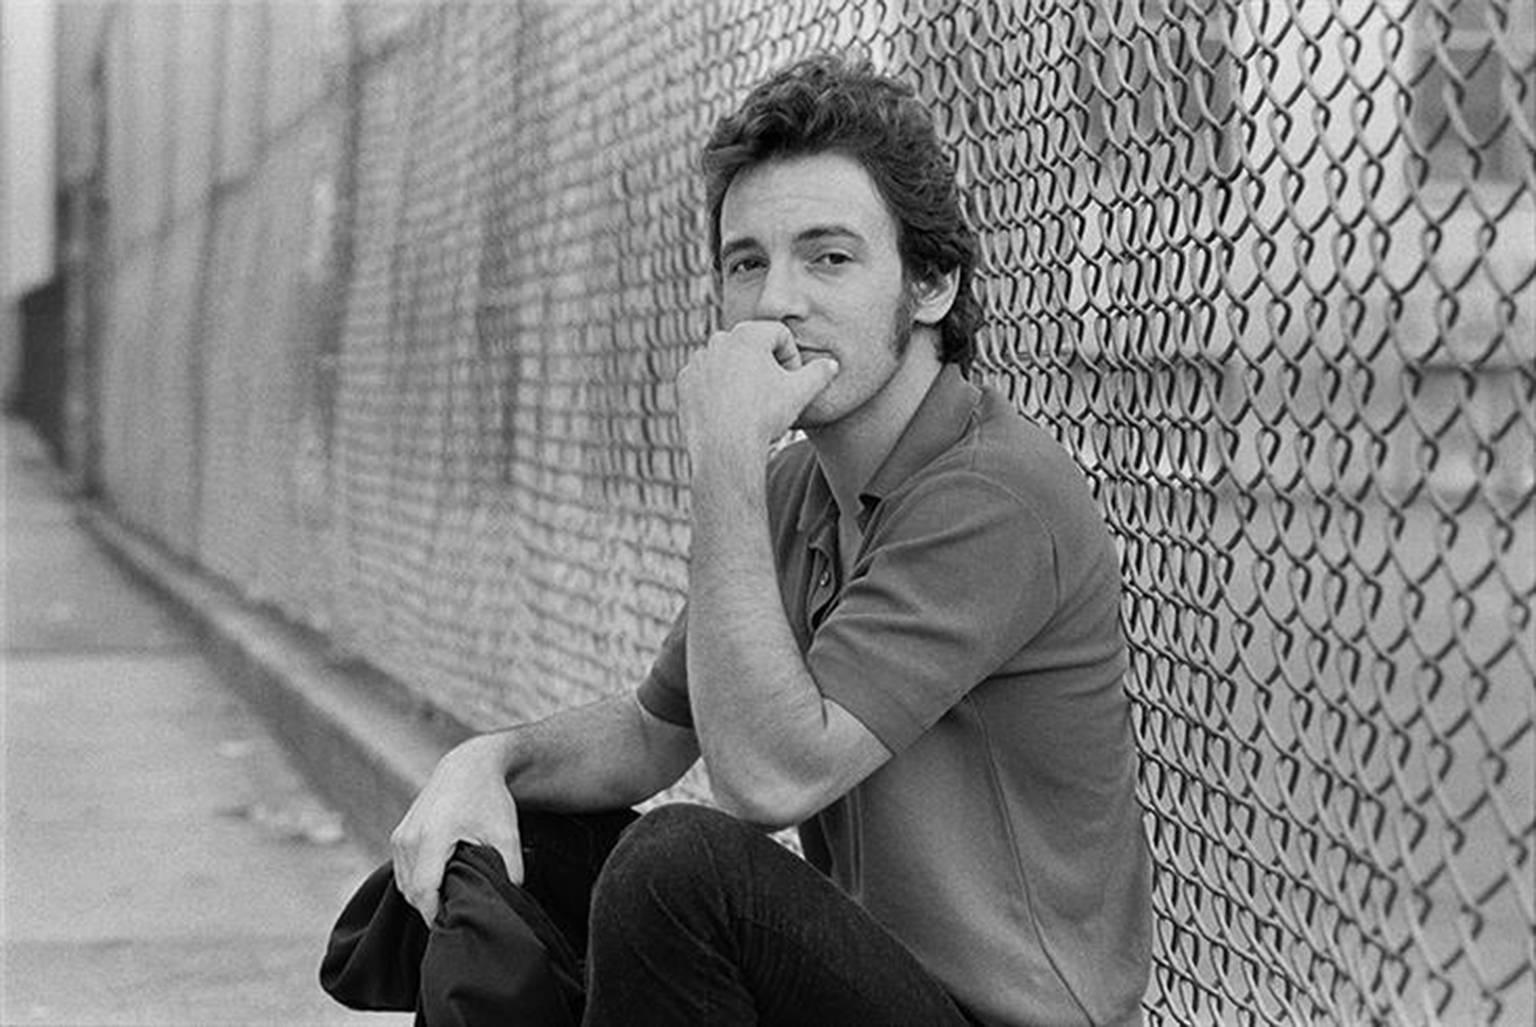 Joel Bernstein Black and White Photograph - Bruce Springsteen by Schoolyard Fence, NY Aug. 1979